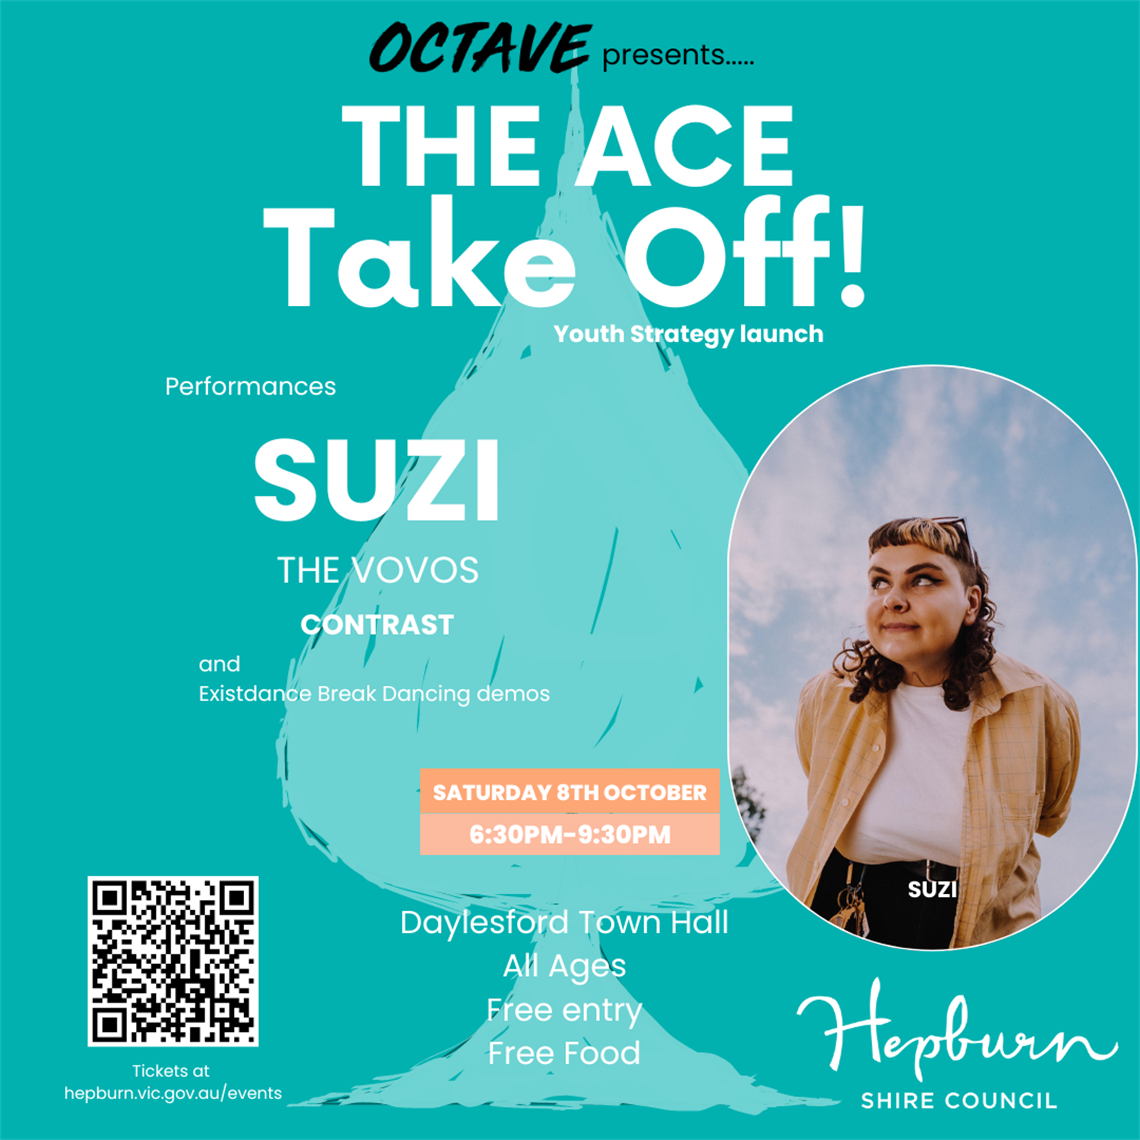 Poster of event with details and performer Suzi